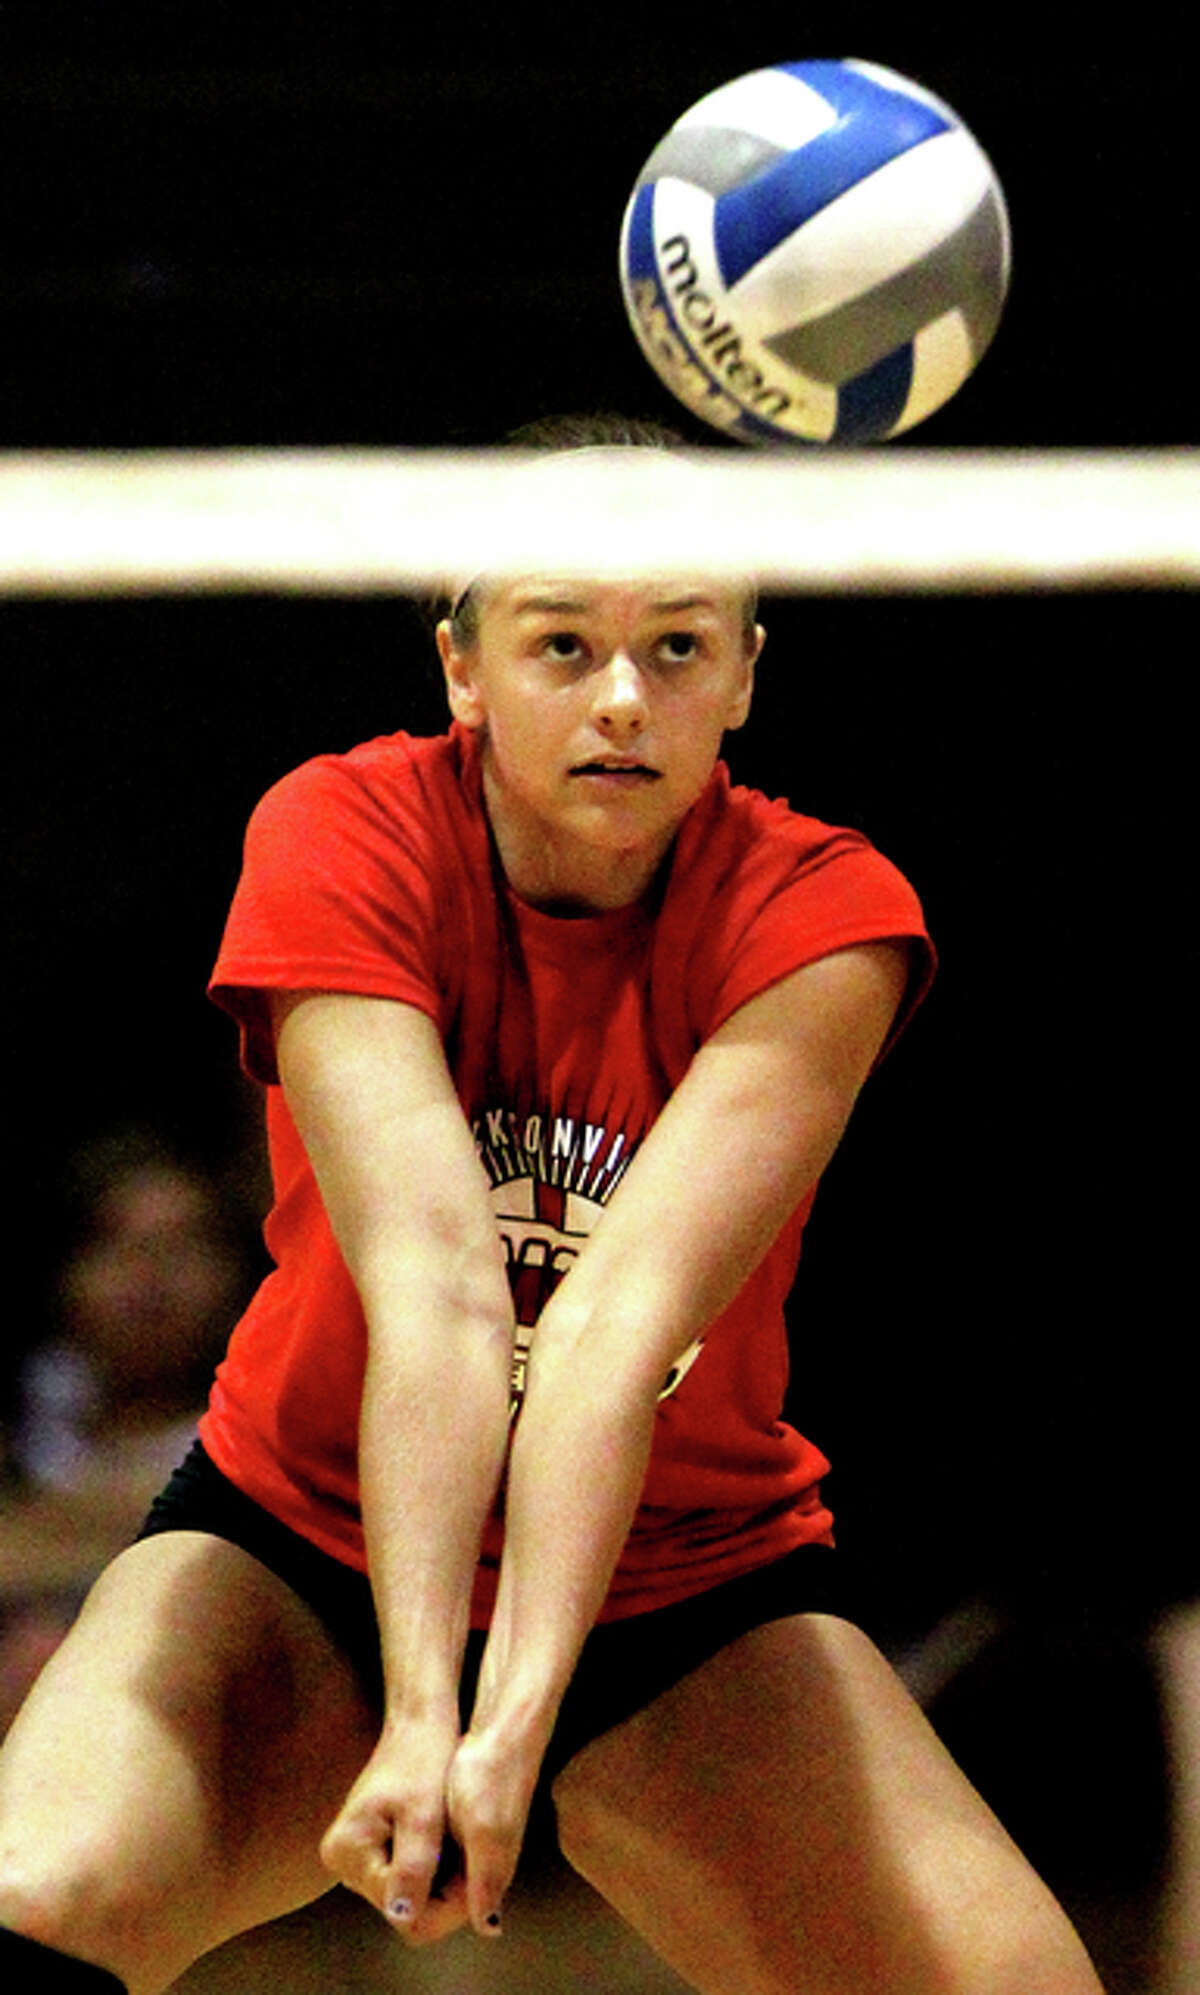 Jacksonville’s Cassie Huey passes the ball during a recent match in the MacMurray College summer volleyball league.